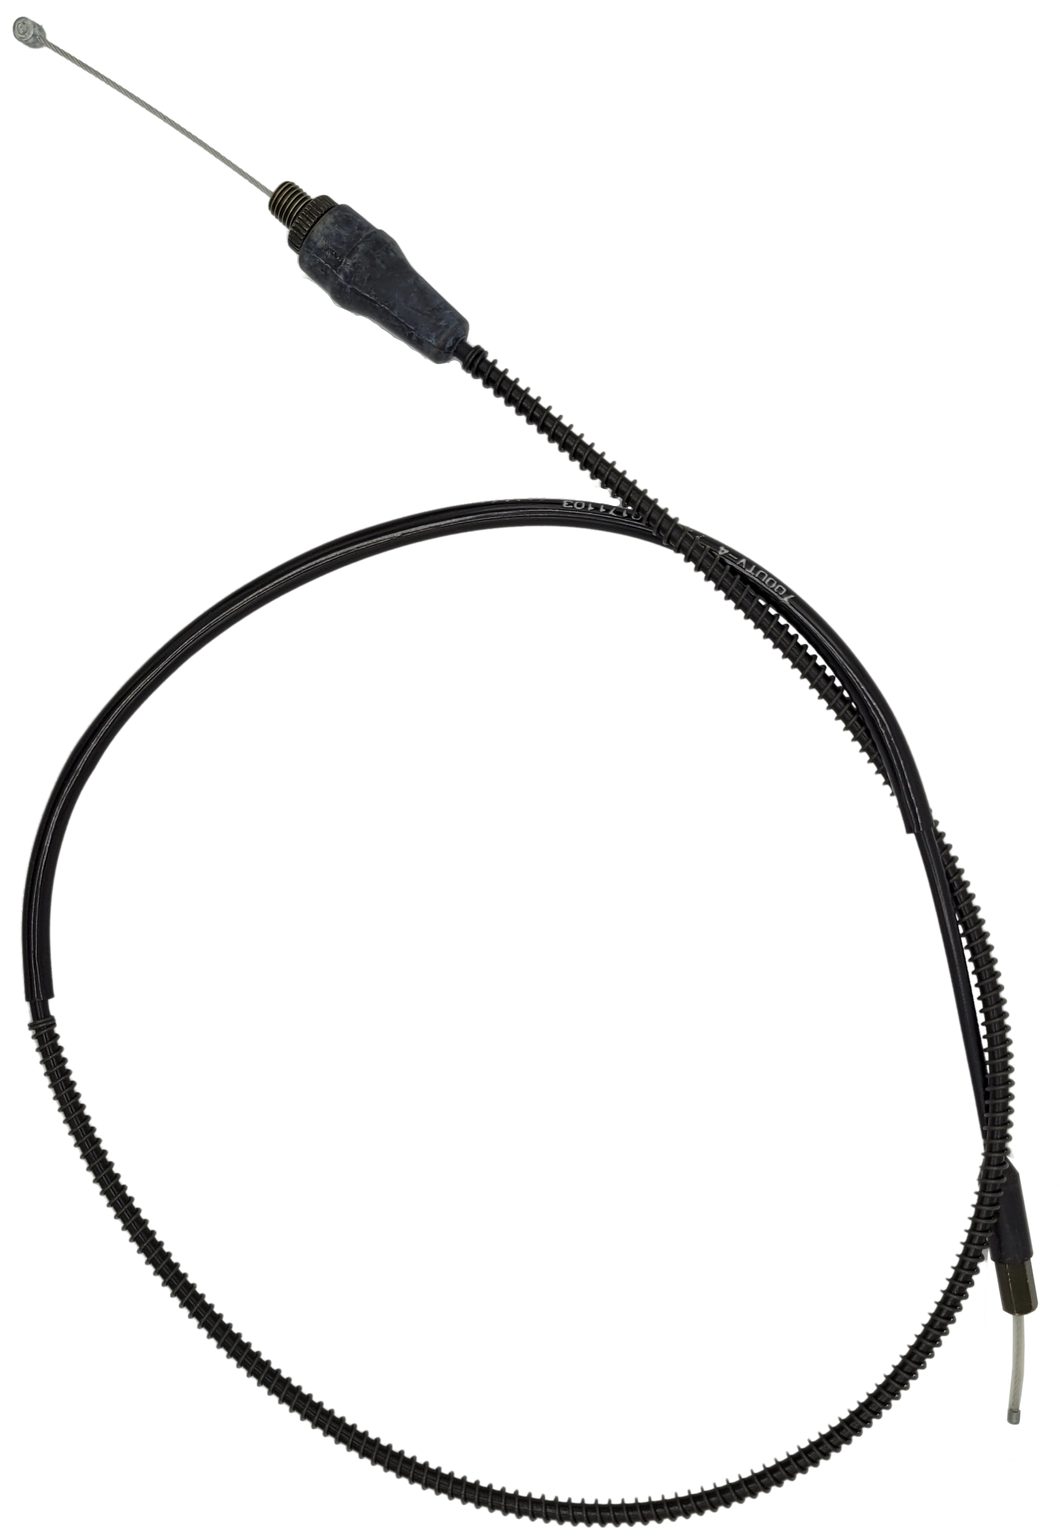 throttle cable